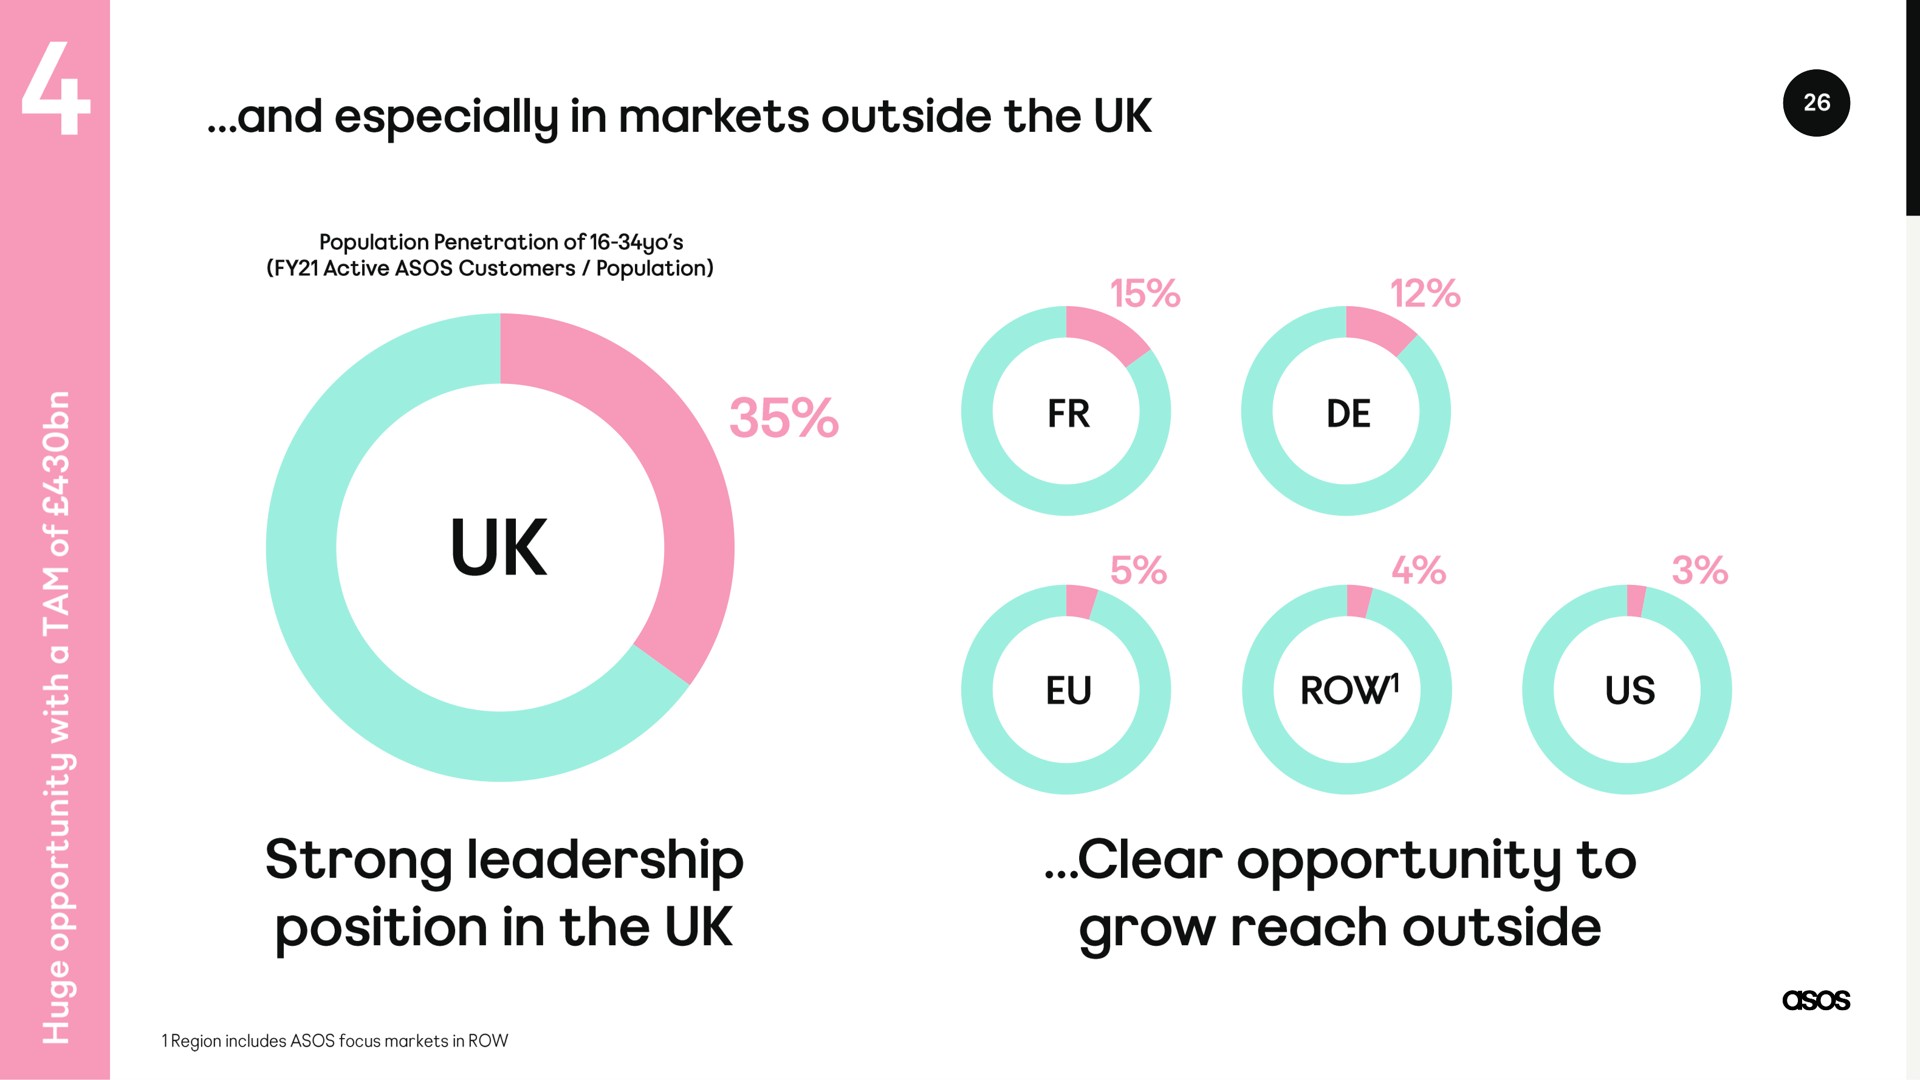 and especially in markets outside the row us strong leadership position in the clear opportunity to grow reach outside | Asos